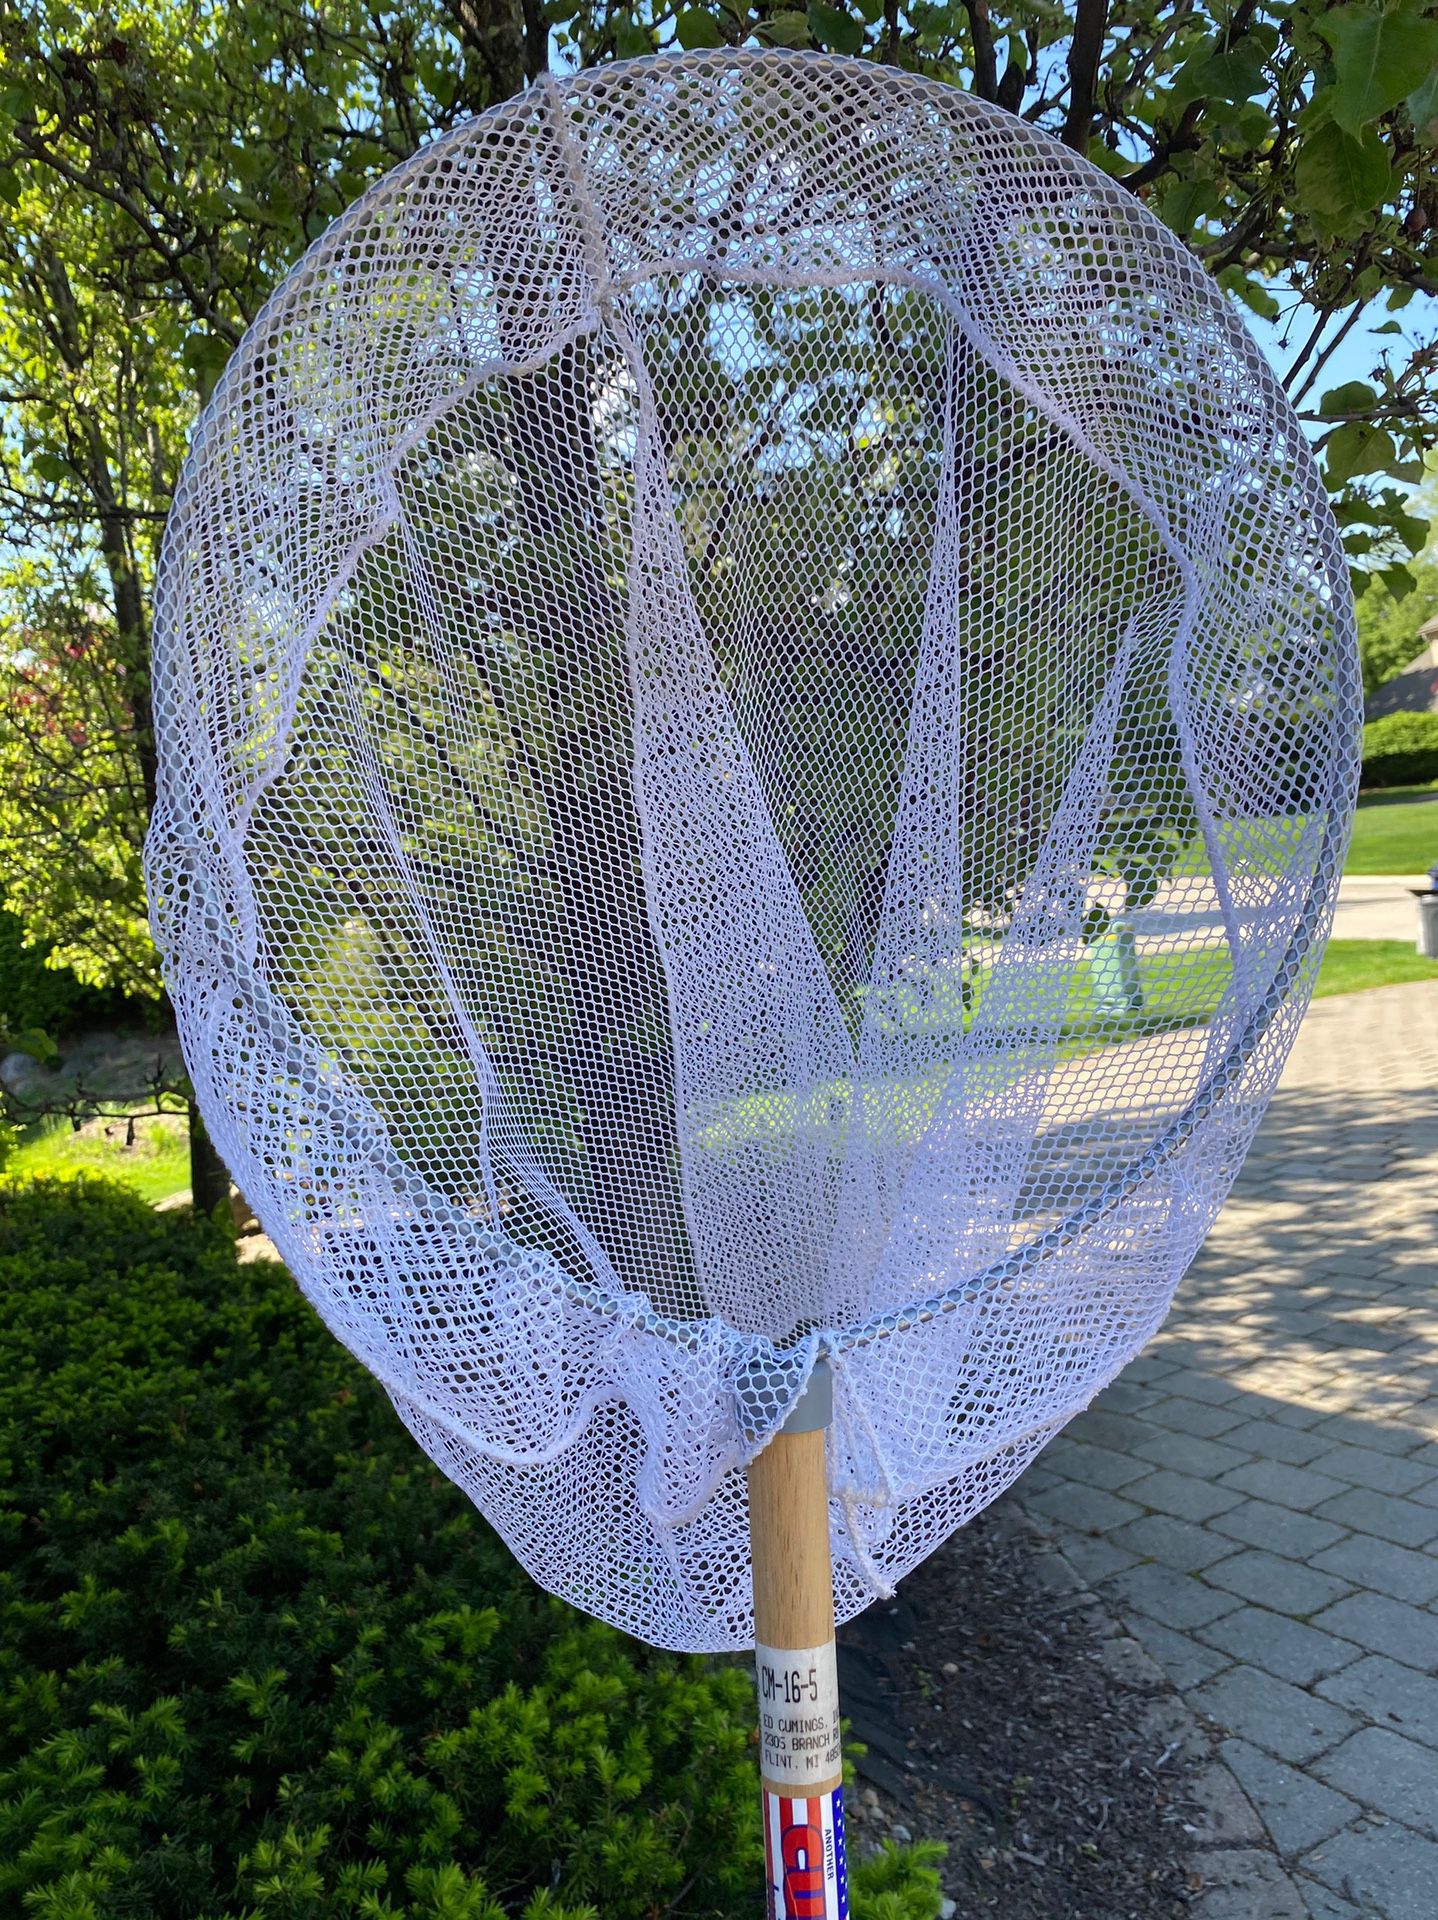 Net for birds or fish